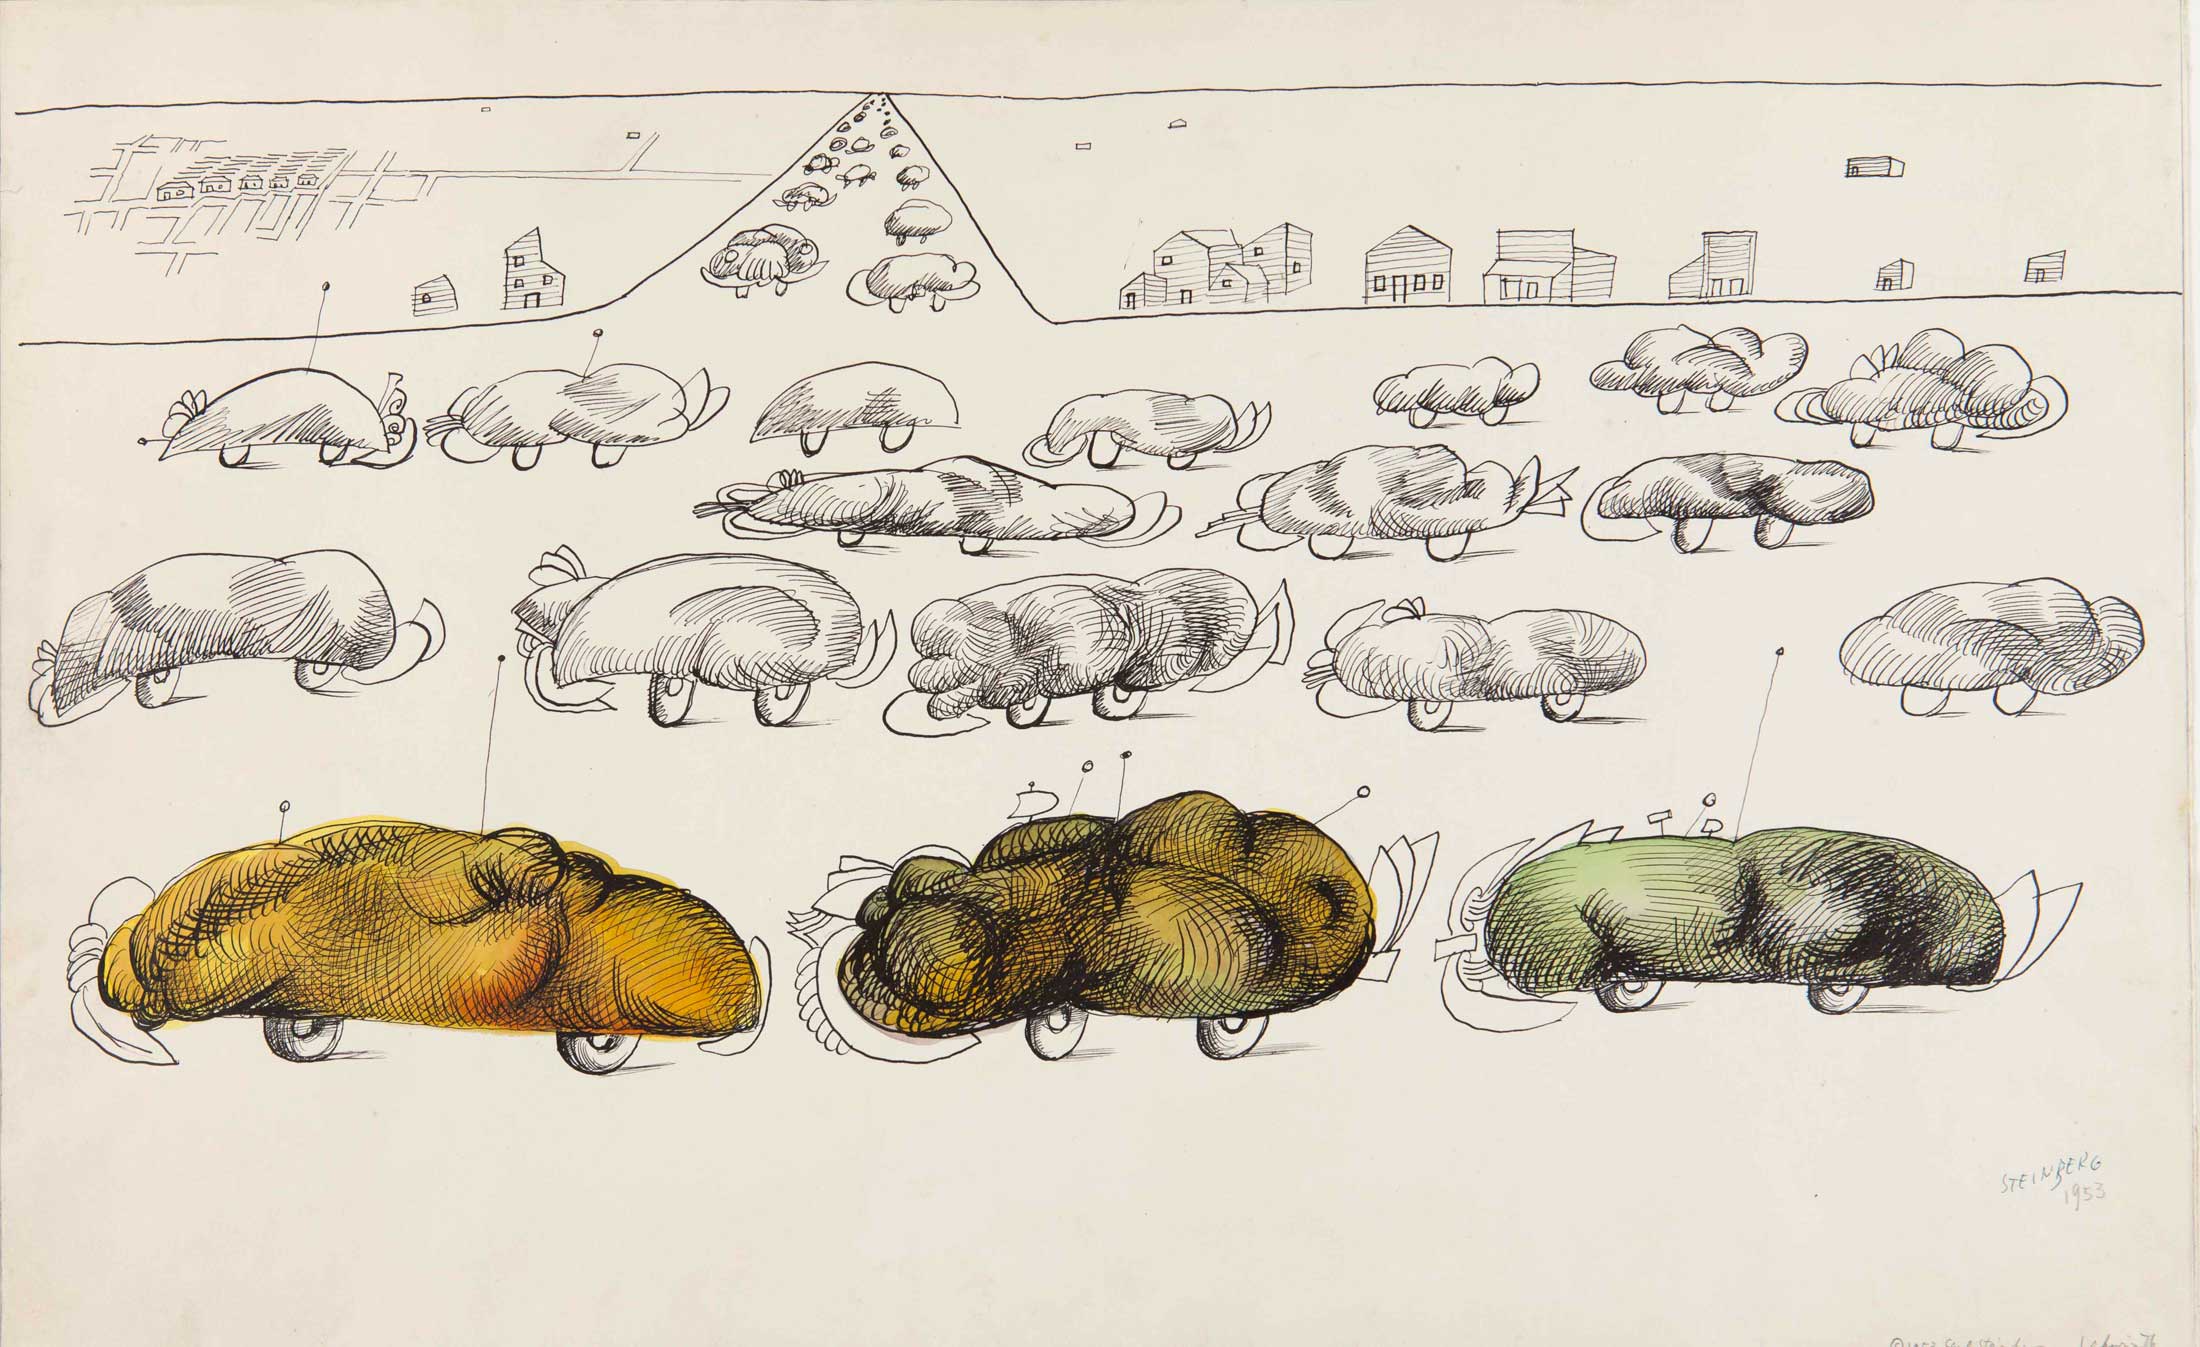 <em>Highway Traffic</em>, 1953. Ink, watercolor, and pencil on paper, 14 ½ x 23 in. Private collection.